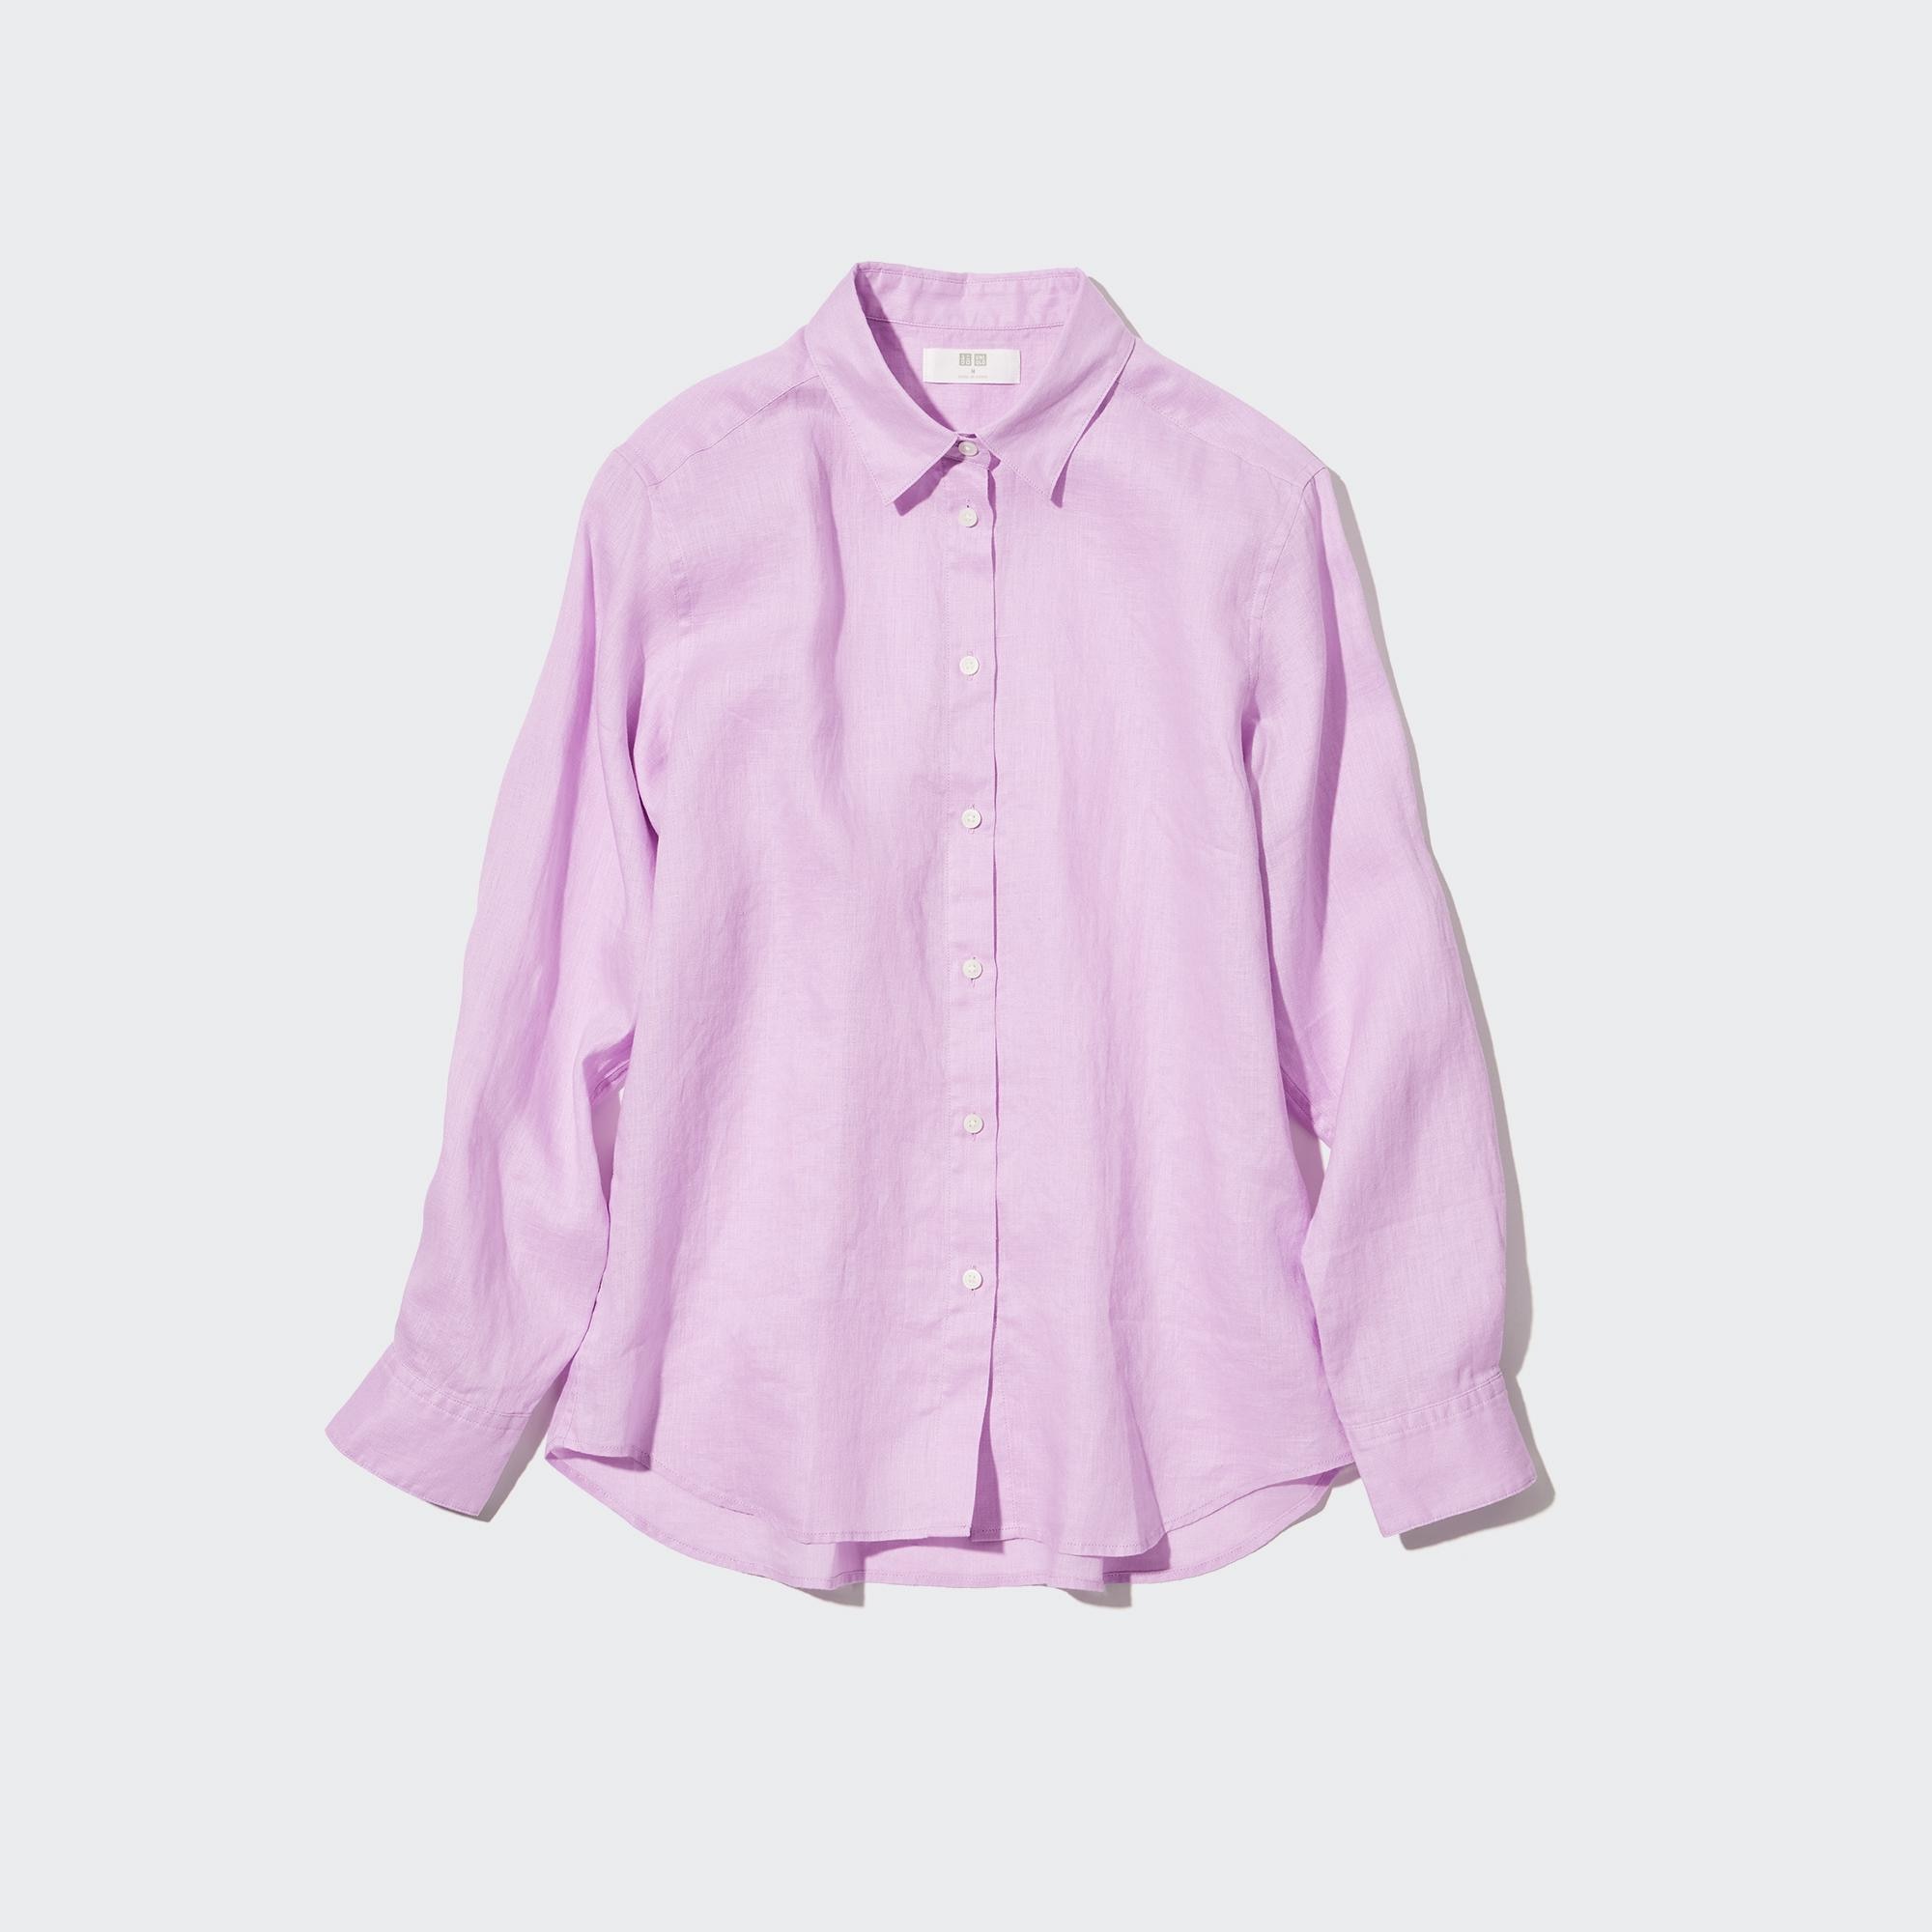 check-styling-ideas-for-premium-linen-long-sleeve-shirt-uv-protection